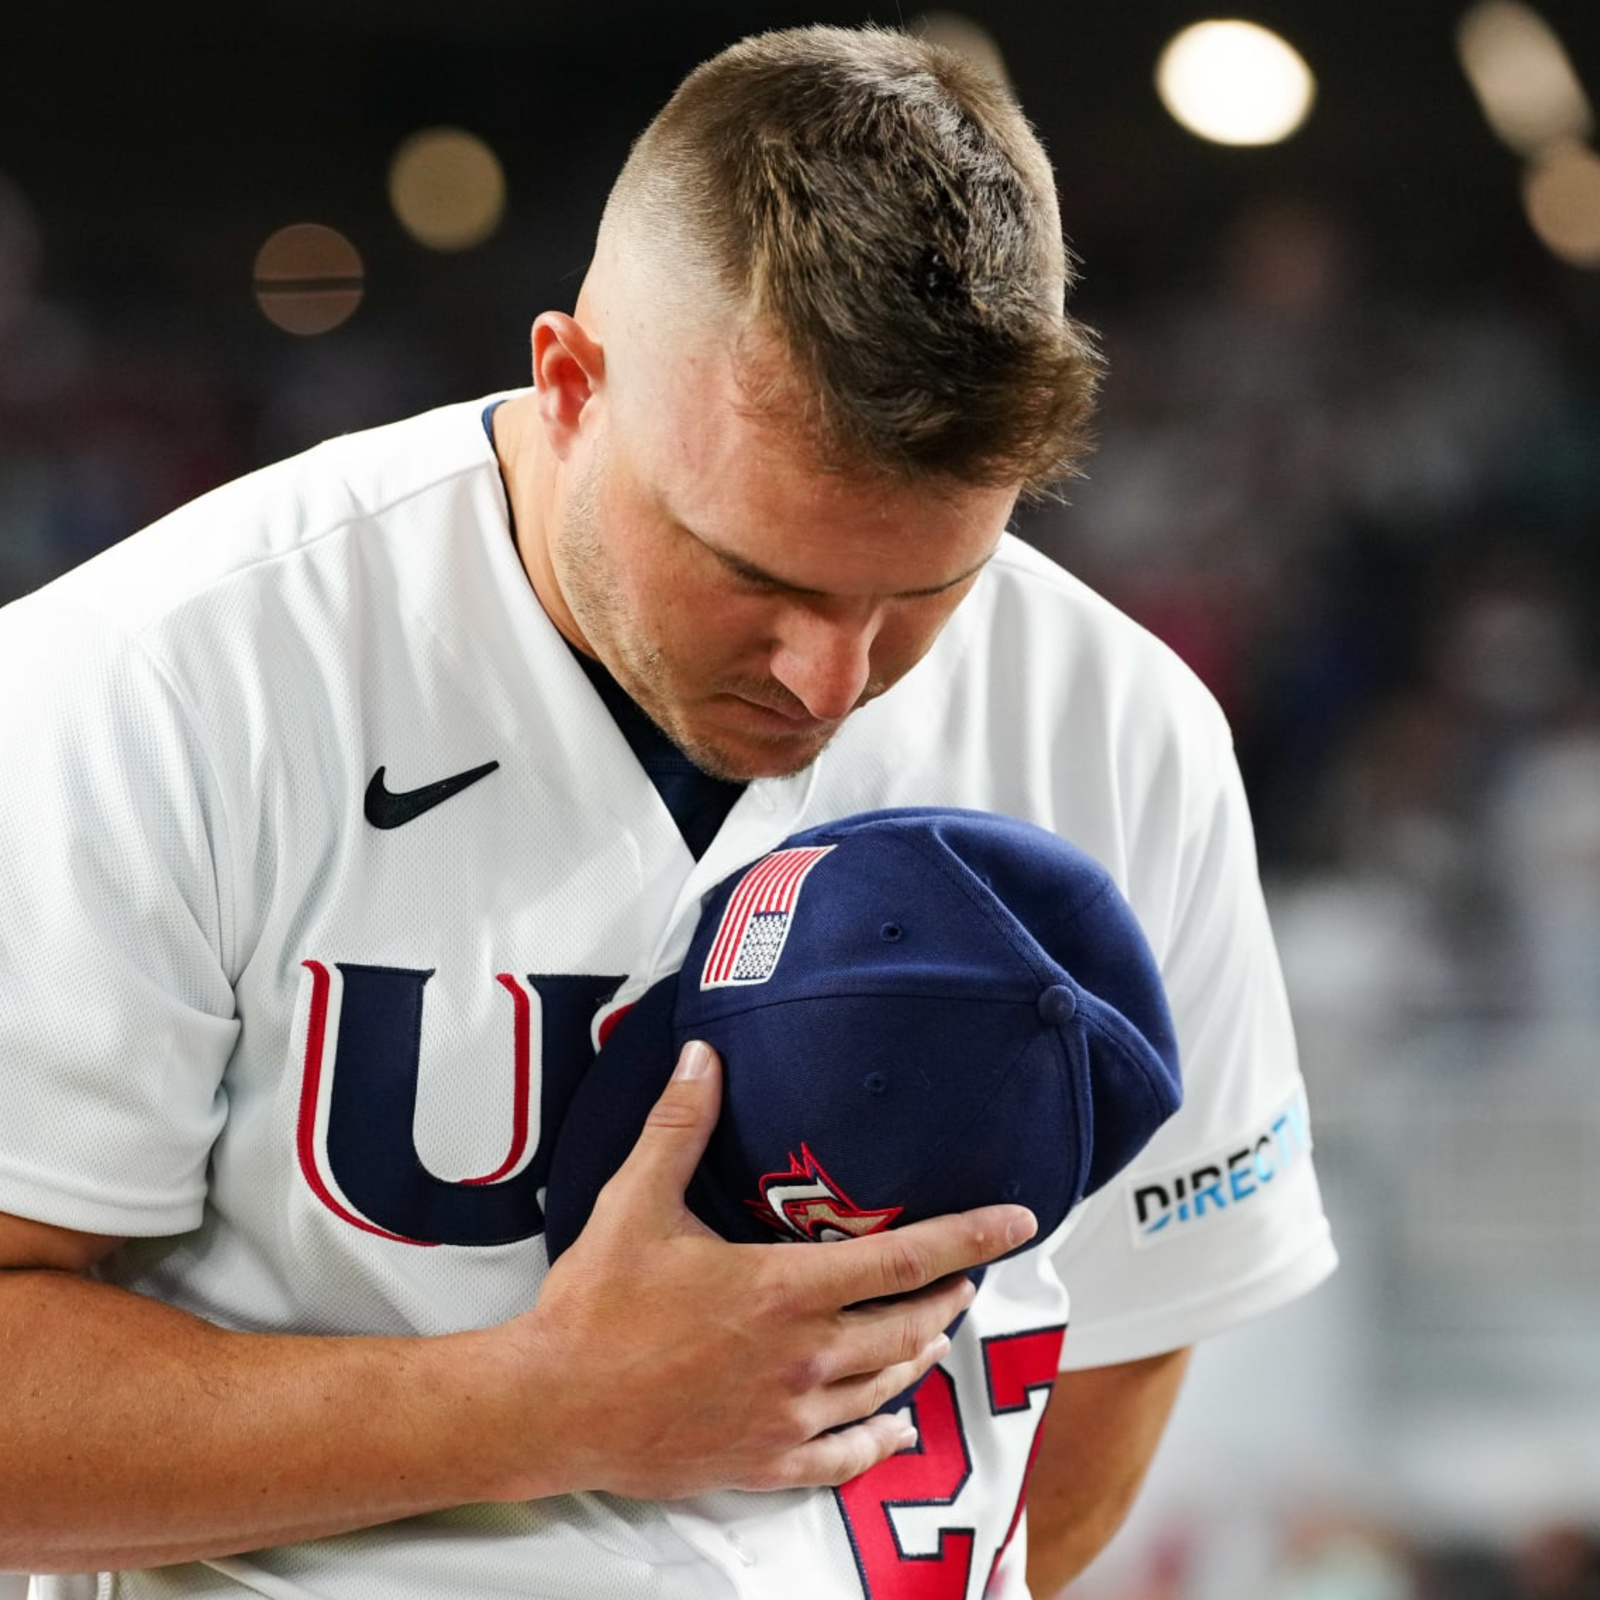 Mike Trout eager to lead Team USA repeat bid at World Baseball